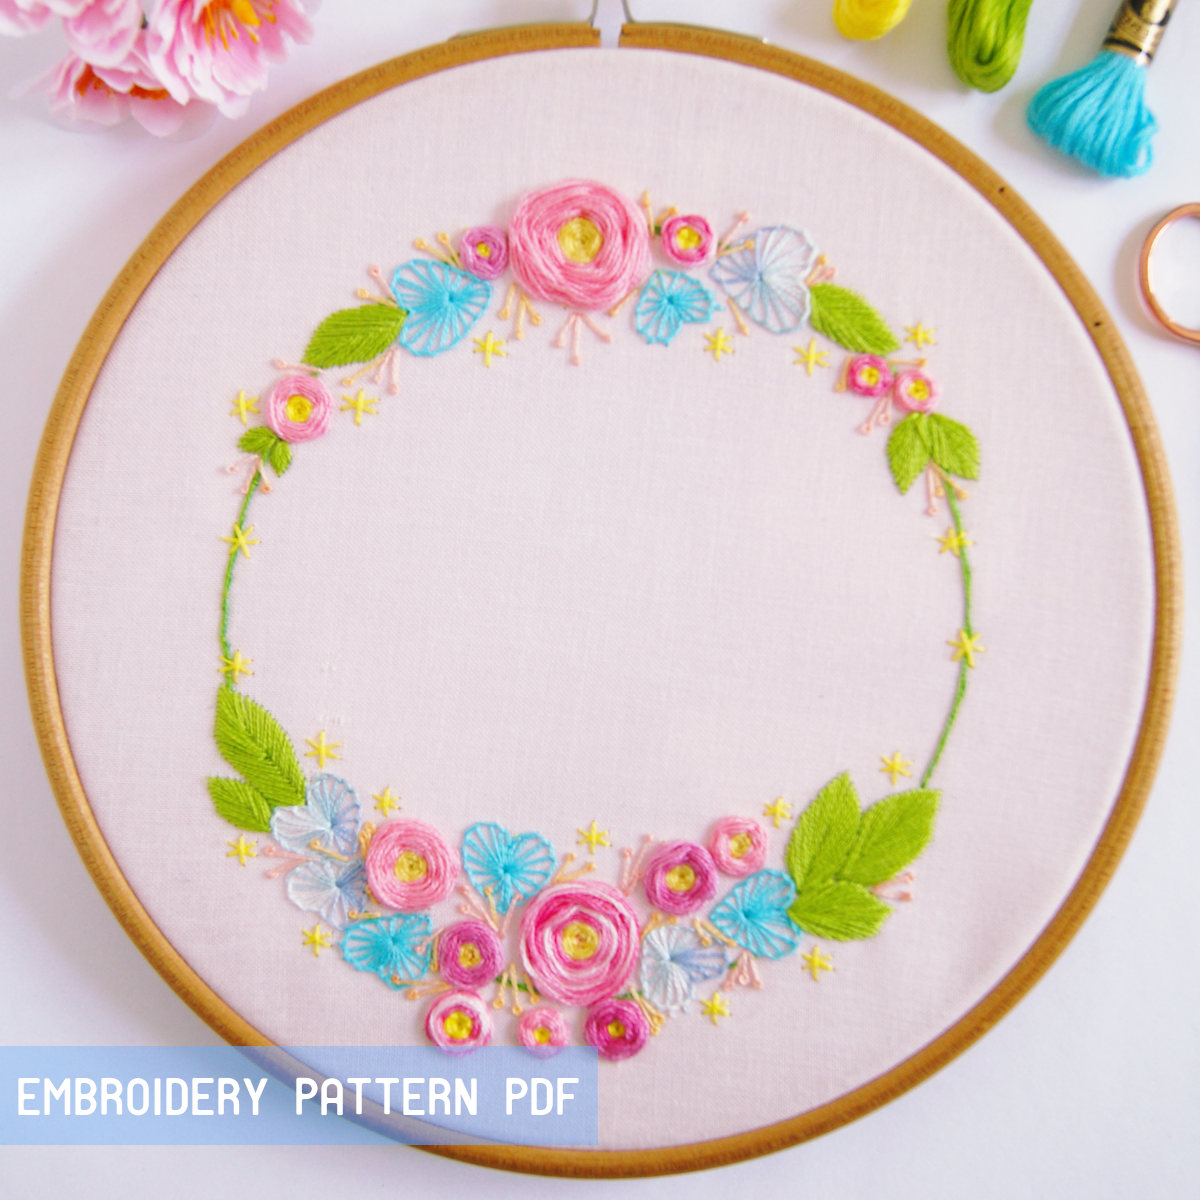 Embroidery Patterns Pdf Polka Bloom Happy Embroidery Patterns For You